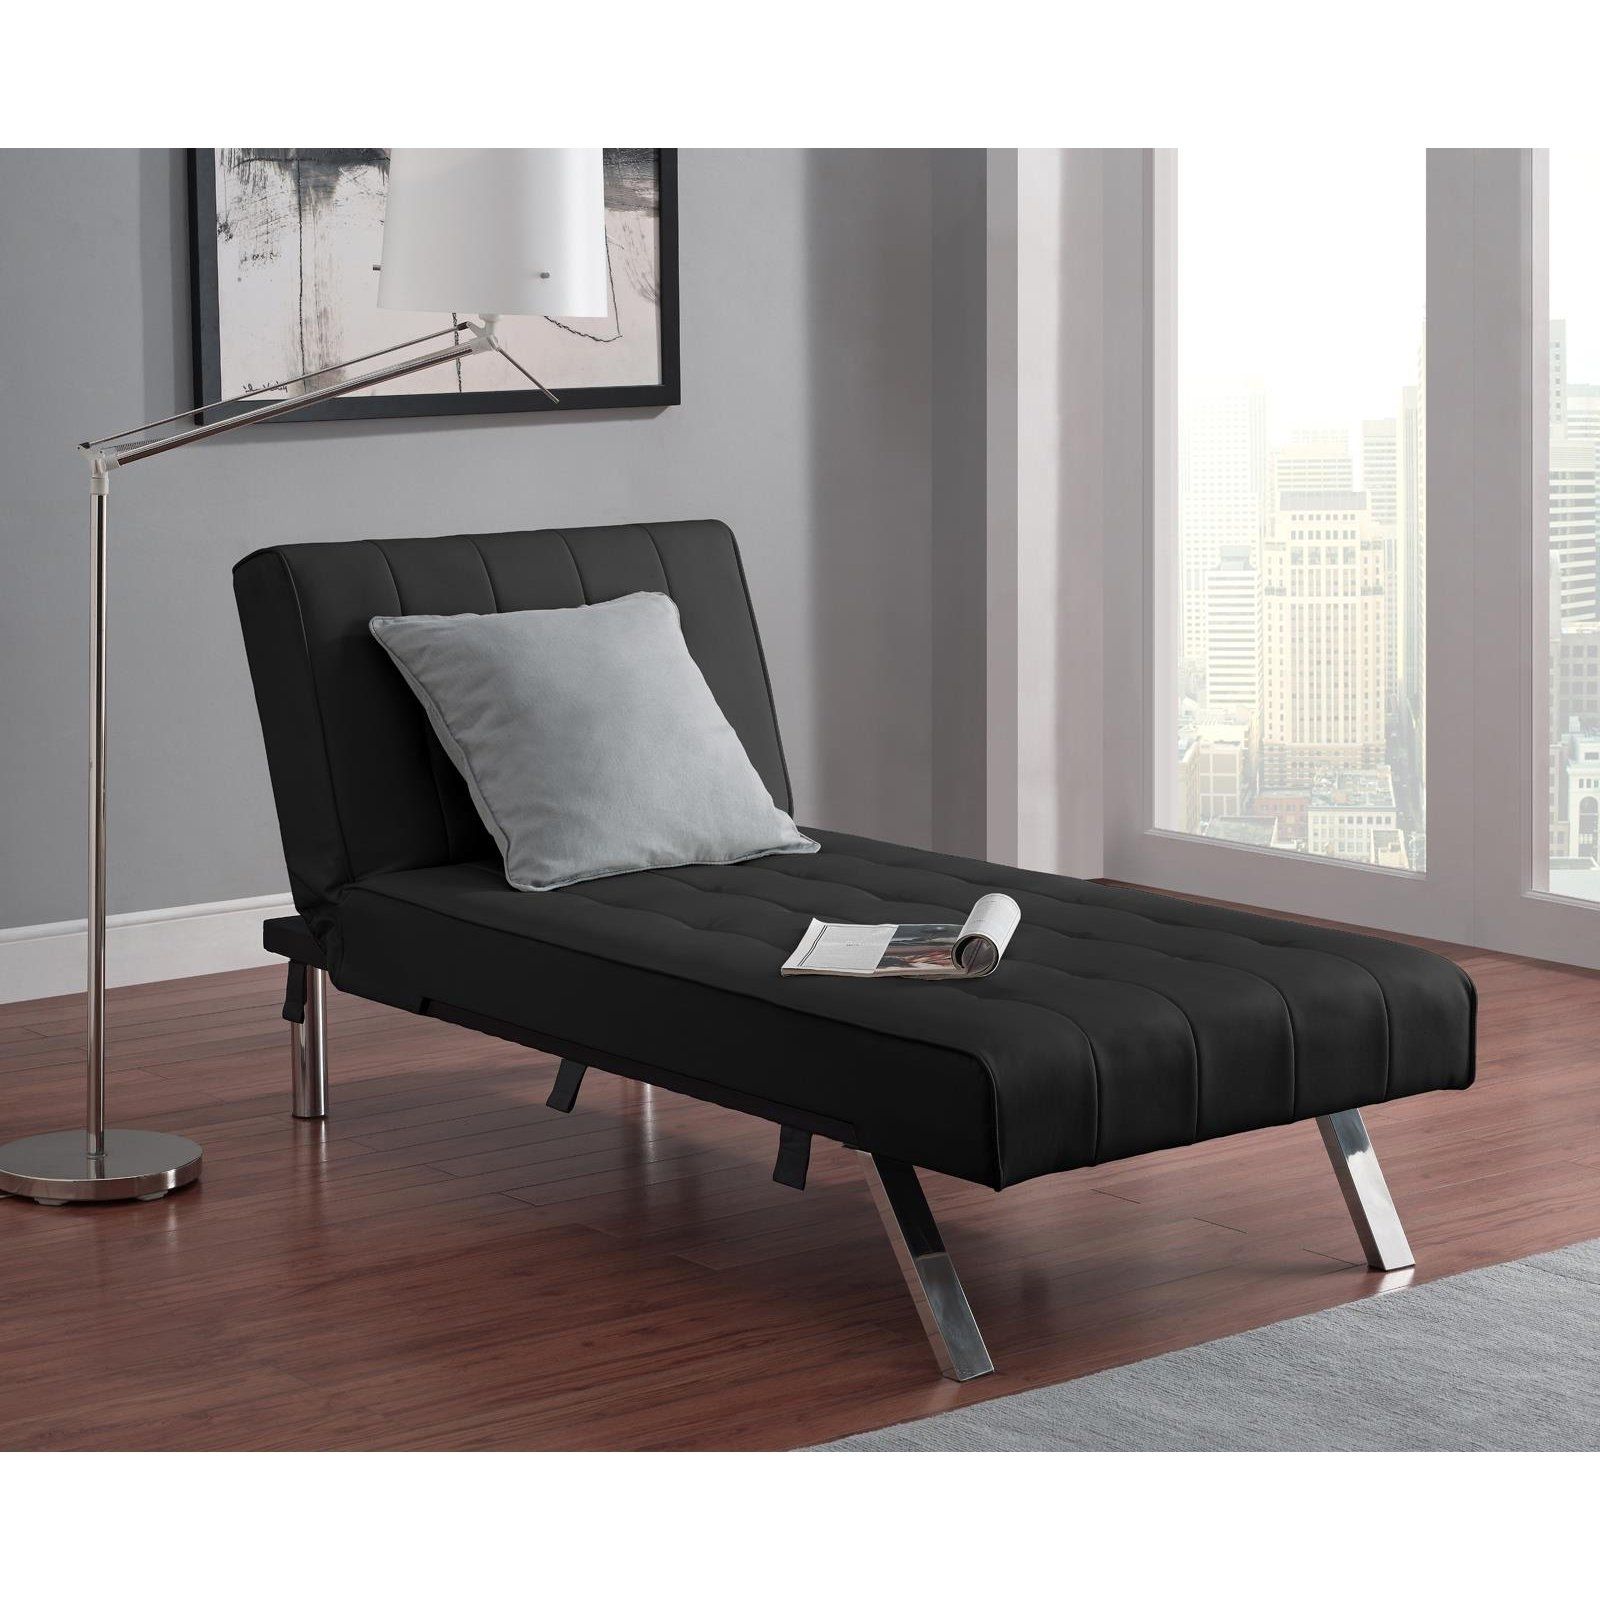 Hayneedle In Latest Cheap Chaise Lounges (View 14 of 15)